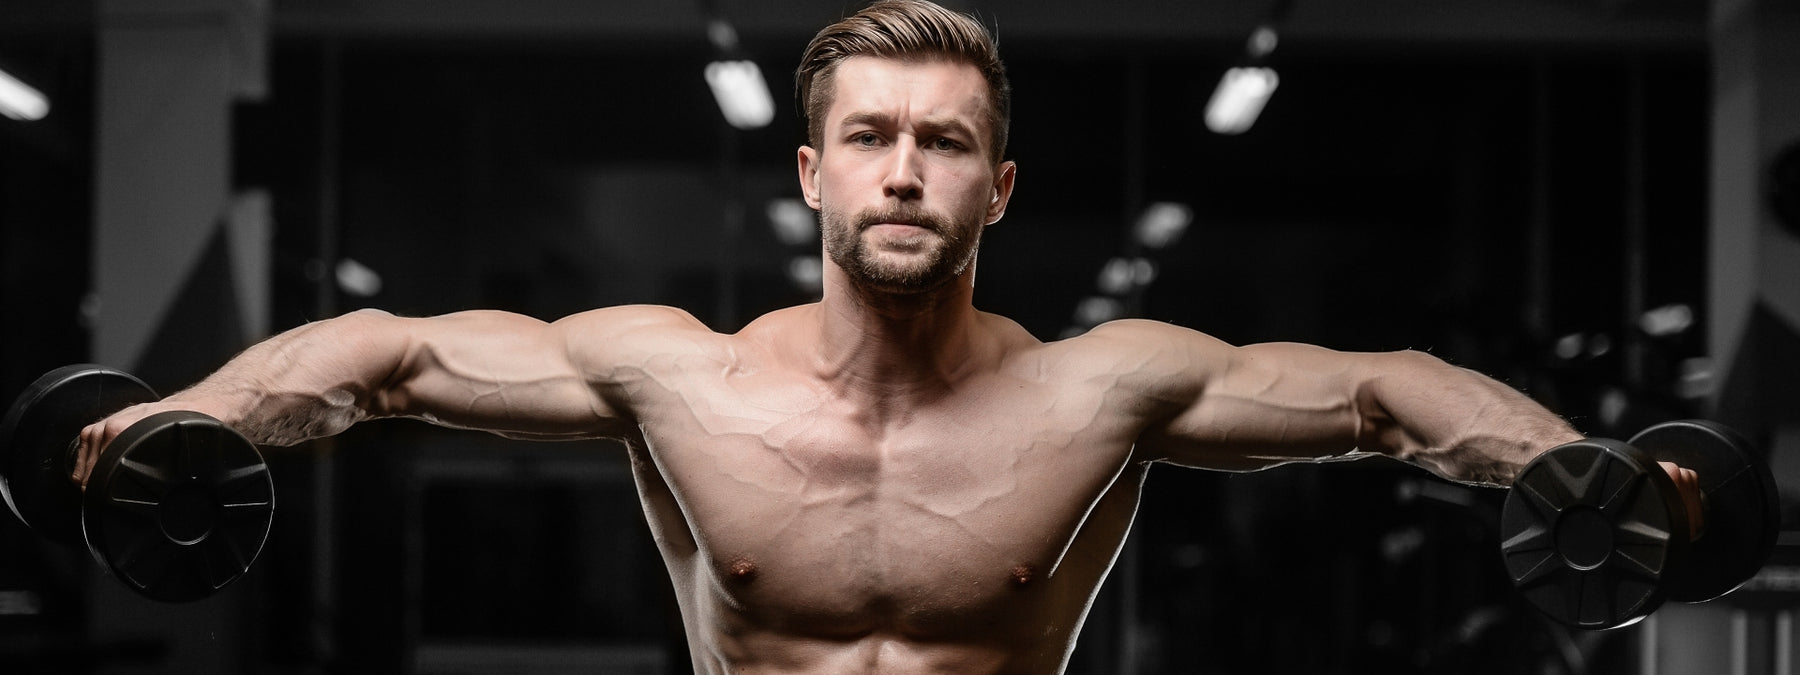 Best Shoulder Workout - 5 Things You Must Know